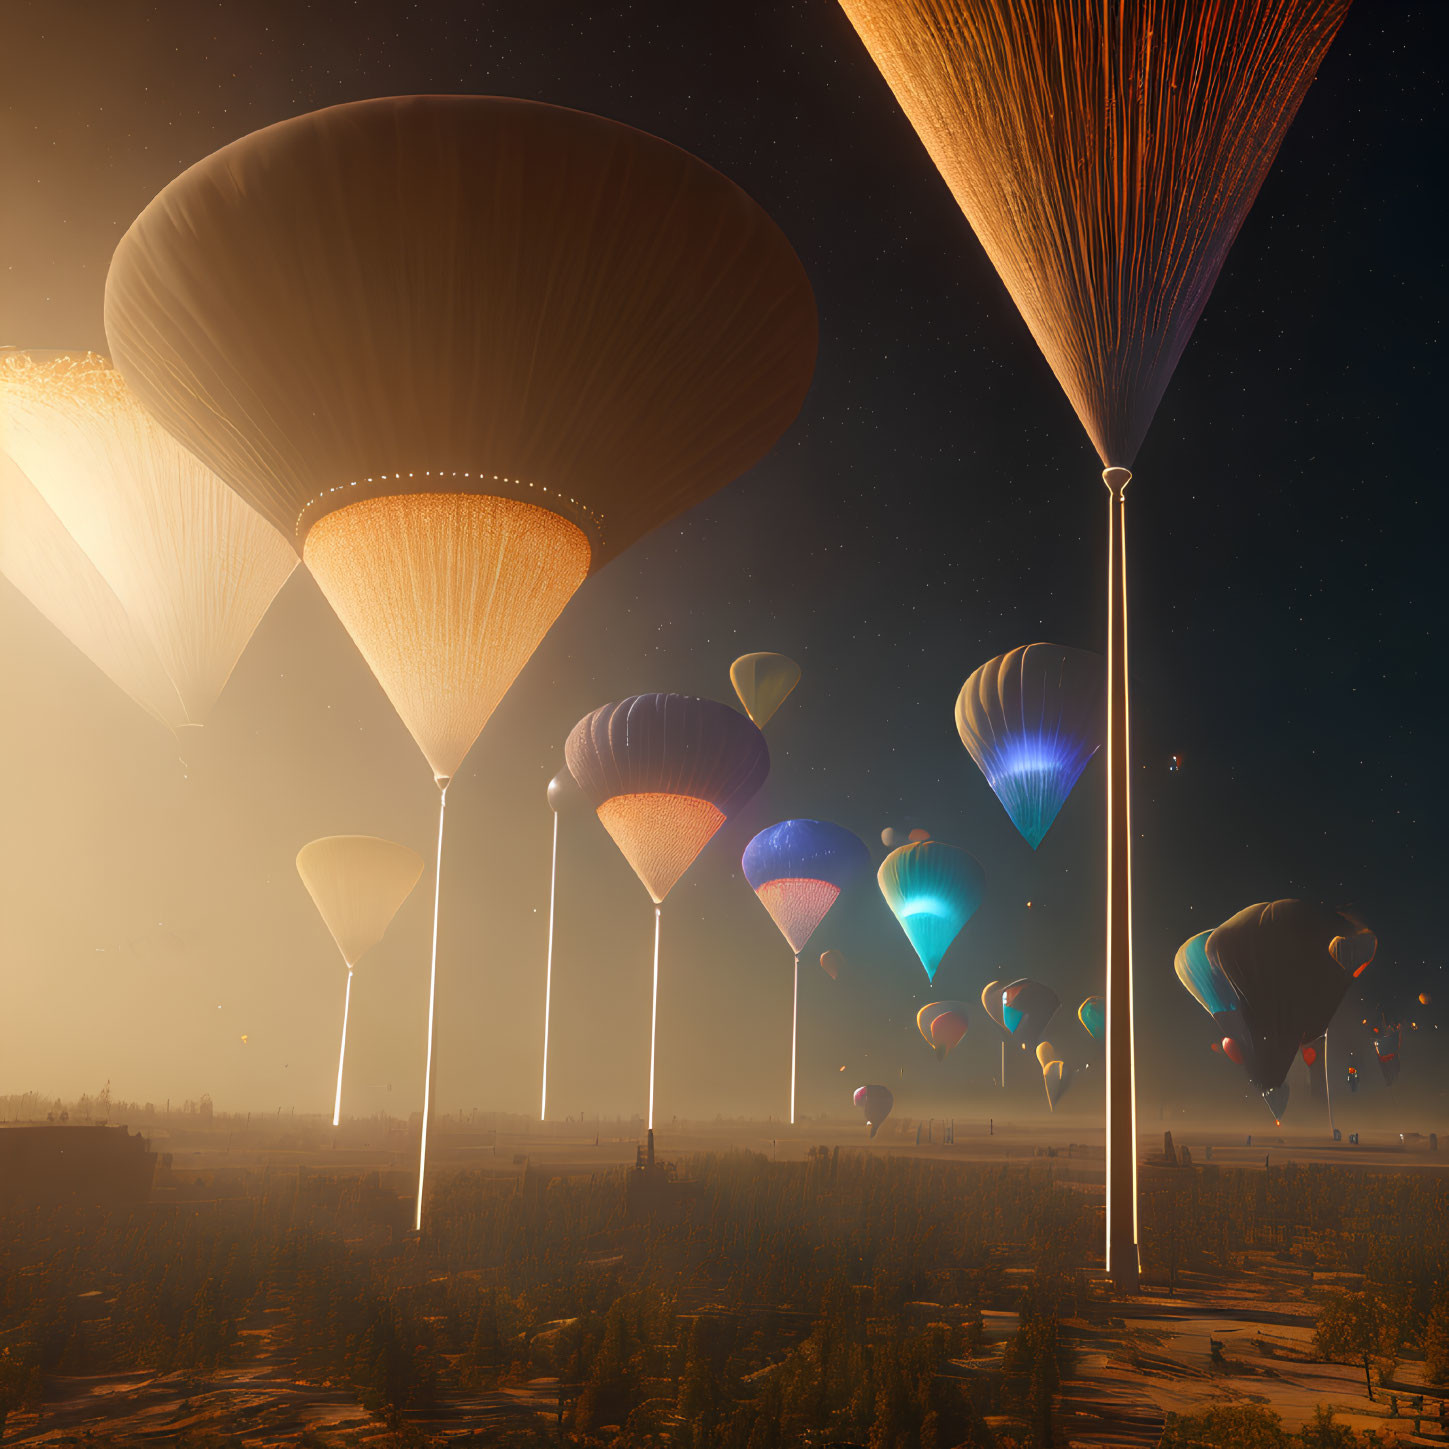 Ethereal giant balloon-like structures at sunset